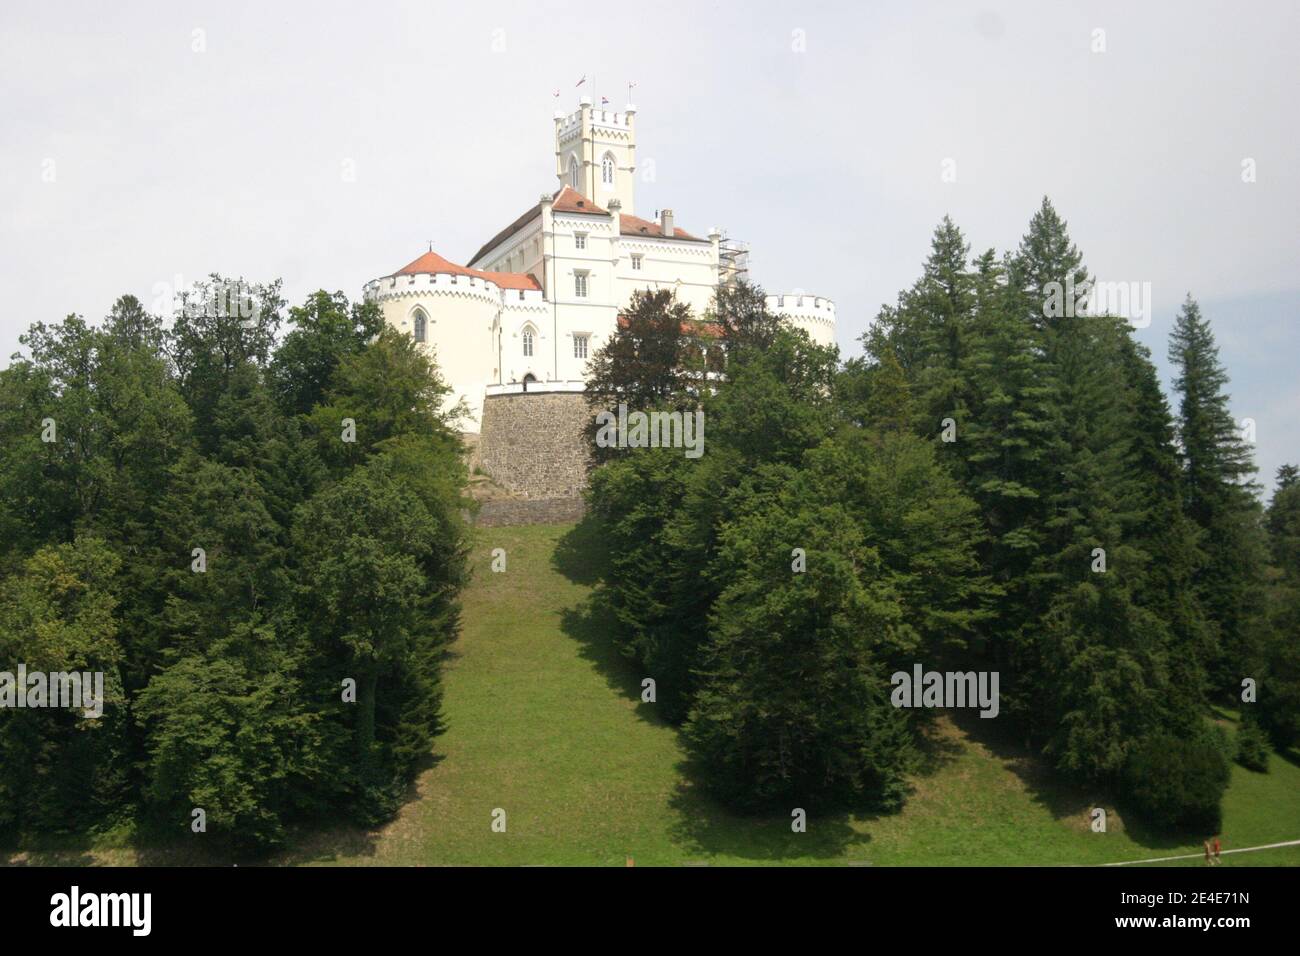 Close up of a medieval castle on the top of the hill, surrounded by forest, photo taken with teleobjective, on a partially cloudy day in summer Stock Photo